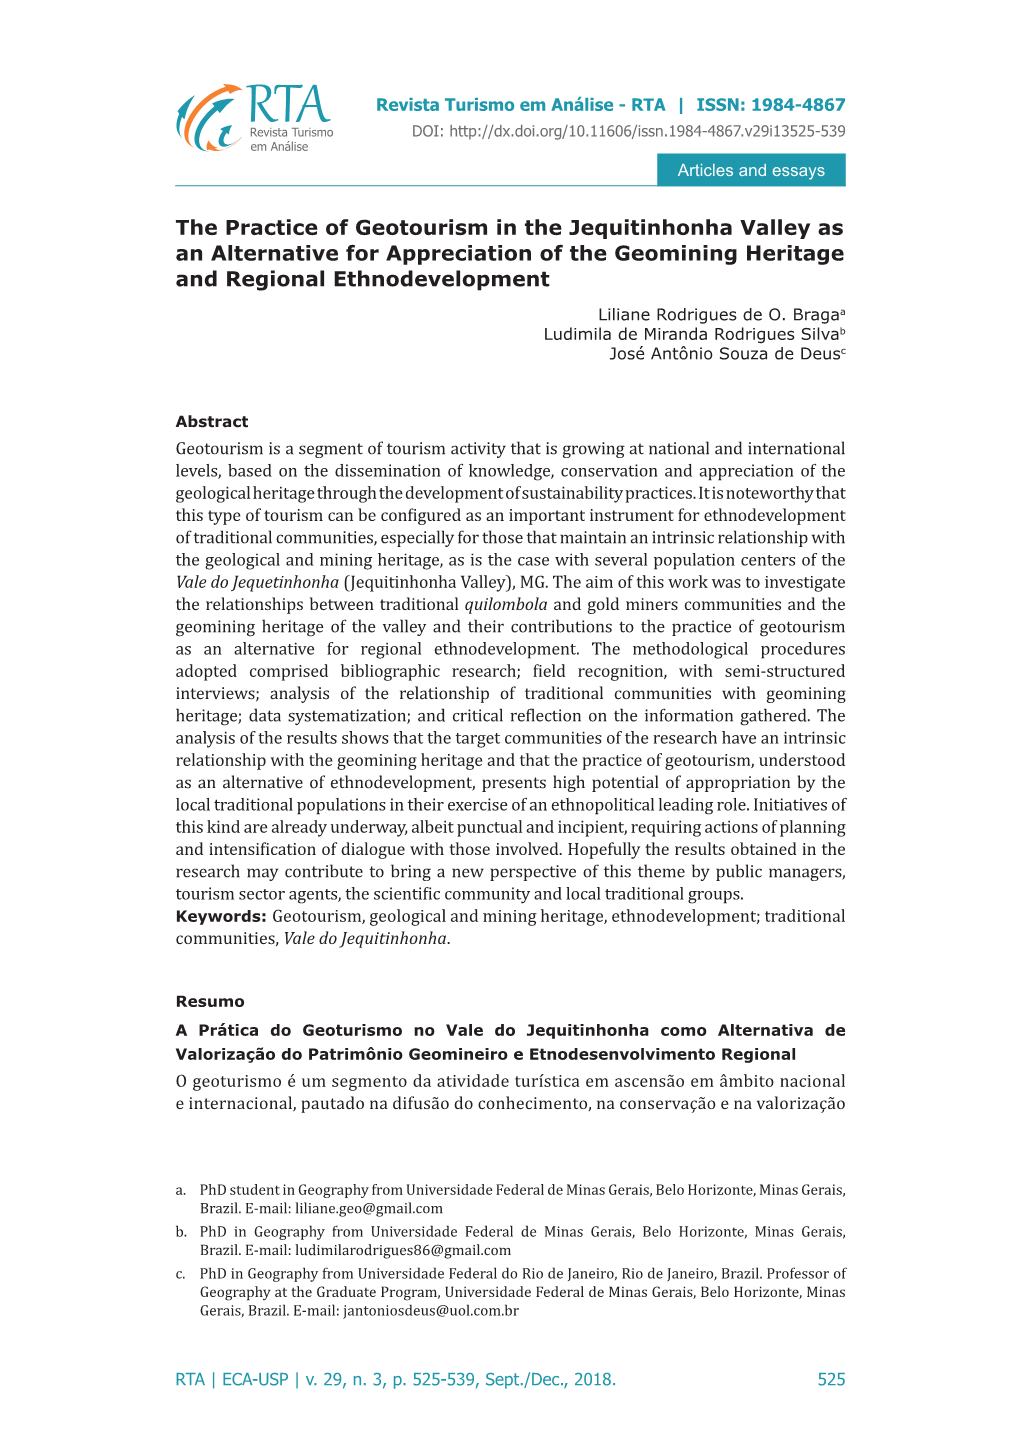 The Practice of Geotourism in the Jequitinhonha Valley As an Alternative for Appreciation of the Geomining Heritage and Regional Ethnodevelopment